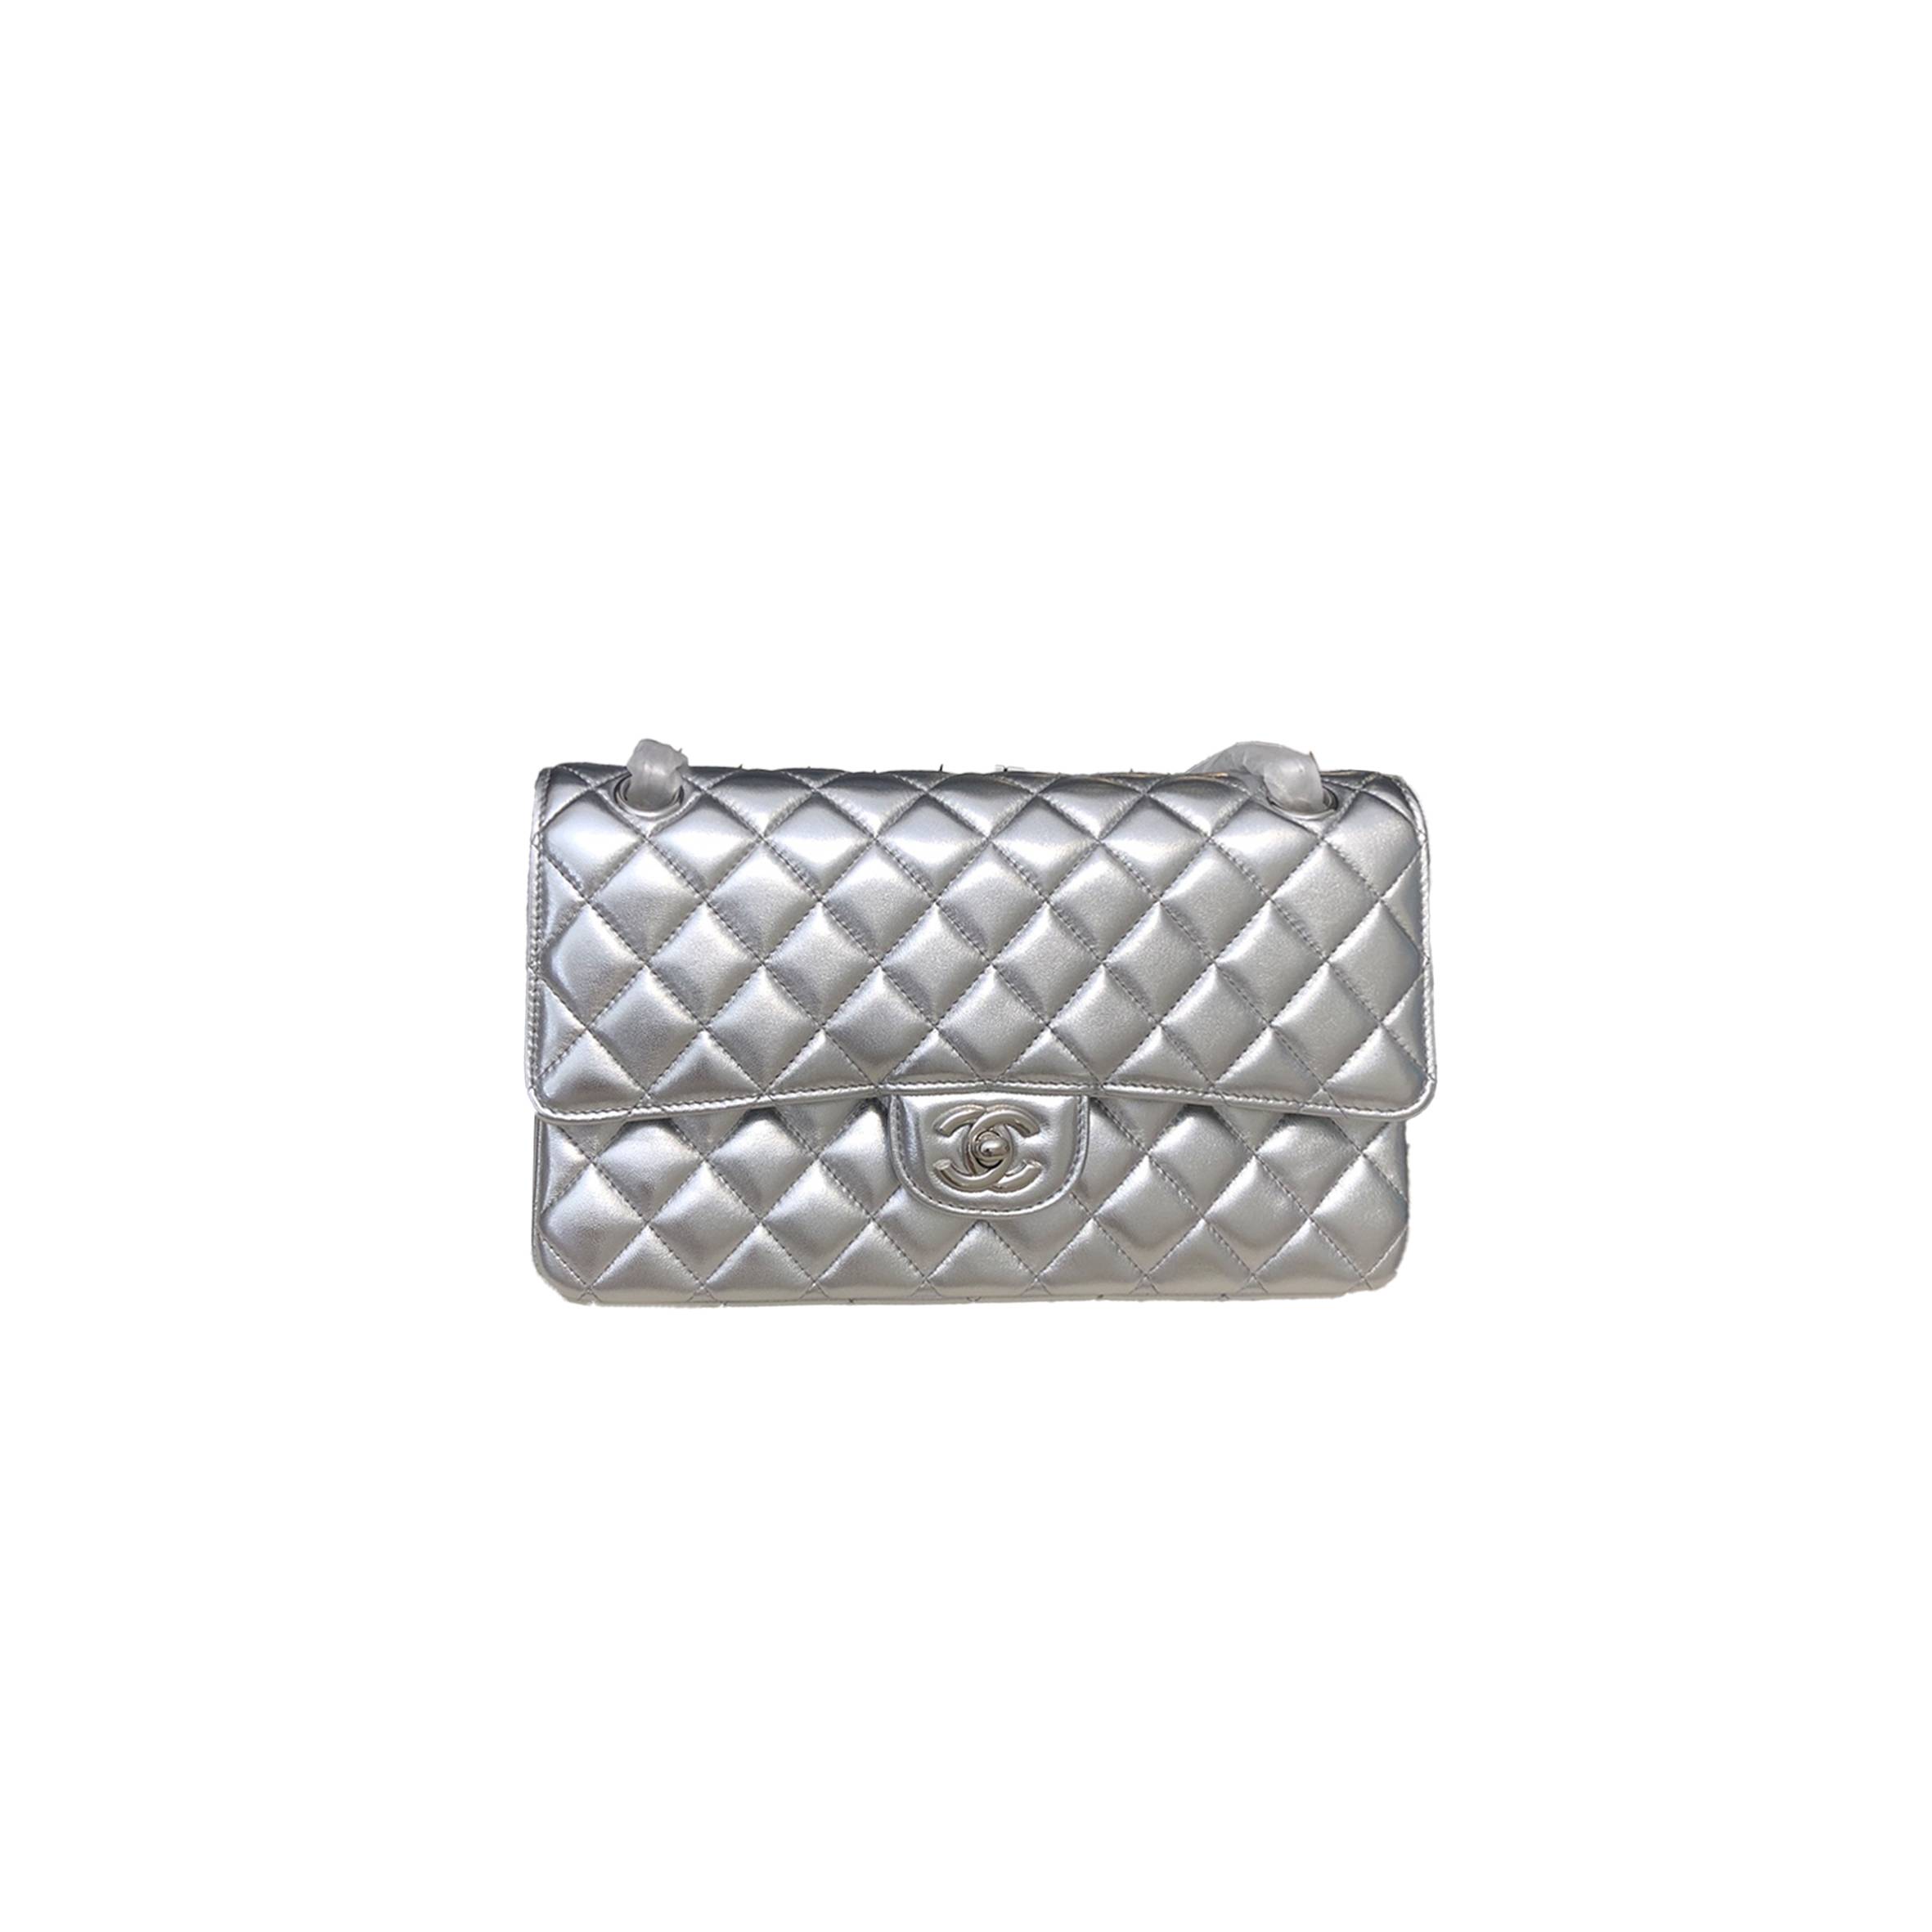 CHANEL SILVER QUILTED LEATHER MEDIUM CLASSIC DOUBLE FLAP BAG A1112 (25*15*6cm)